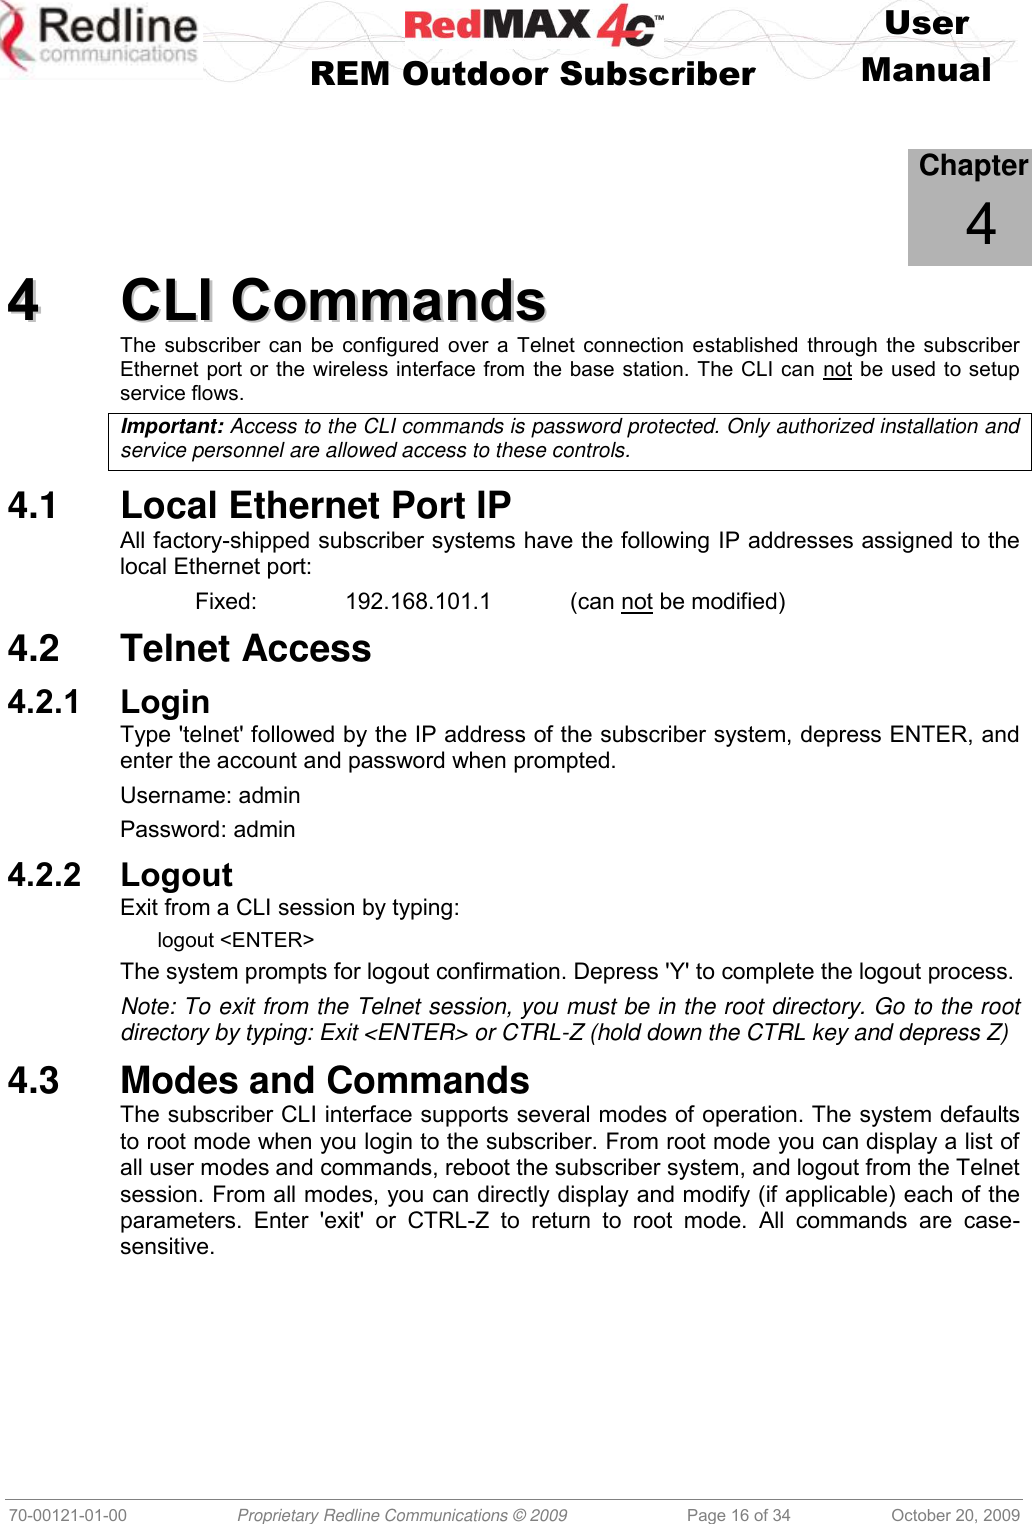    User   REM Outdoor Subscriber  Manual   70-00121-01-00 Proprietary Redline Communications © 2009 Page 16 of 34 October 20, 2009             Chapter 4 44  CCLLII  CCoommmmaannddss  The subscriber can be configured over a Telnet connection established through the subscriber Ethernet port or the wireless interface from the base station. The CLI can not be used to setup service flows. Important: Access to the CLI commands is password protected. Only authorized installation and service personnel are allowed access to these controls. 4.1  Local Ethernet Port IP All factory-shipped subscriber systems have the following IP addresses assigned to the local Ethernet port:   Fixed:    192.168.101.1   (can not be modified) 4.2  Telnet Access 4.2.1 Login Type &apos;telnet&apos; followed by the IP address of the subscriber system, depress ENTER, and enter the account and password when prompted. Username: admin Password: admin 4.2.2 Logout Exit from a CLI session by typing: logout &lt;ENTER&gt; The system prompts for logout confirmation. Depress &apos;Y&apos; to complete the logout process. Note: To exit from the Telnet session, you must be in the root directory. Go to the root directory by typing: Exit &lt;ENTER&gt; or CTRL-Z (hold down the CTRL key and depress Z) 4.3  Modes and Commands The subscriber CLI interface supports several modes of operation. The system defaults to root mode when you login to the subscriber. From root mode you can display a list of all user modes and commands, reboot the subscriber system, and logout from the Telnet session. From all modes, you can directly display and modify (if applicable) each of the parameters.  Enter  &apos;exit&apos;  or  CTRL-Z  to  return  to  root  mode.  All  commands  are  case-sensitive. 